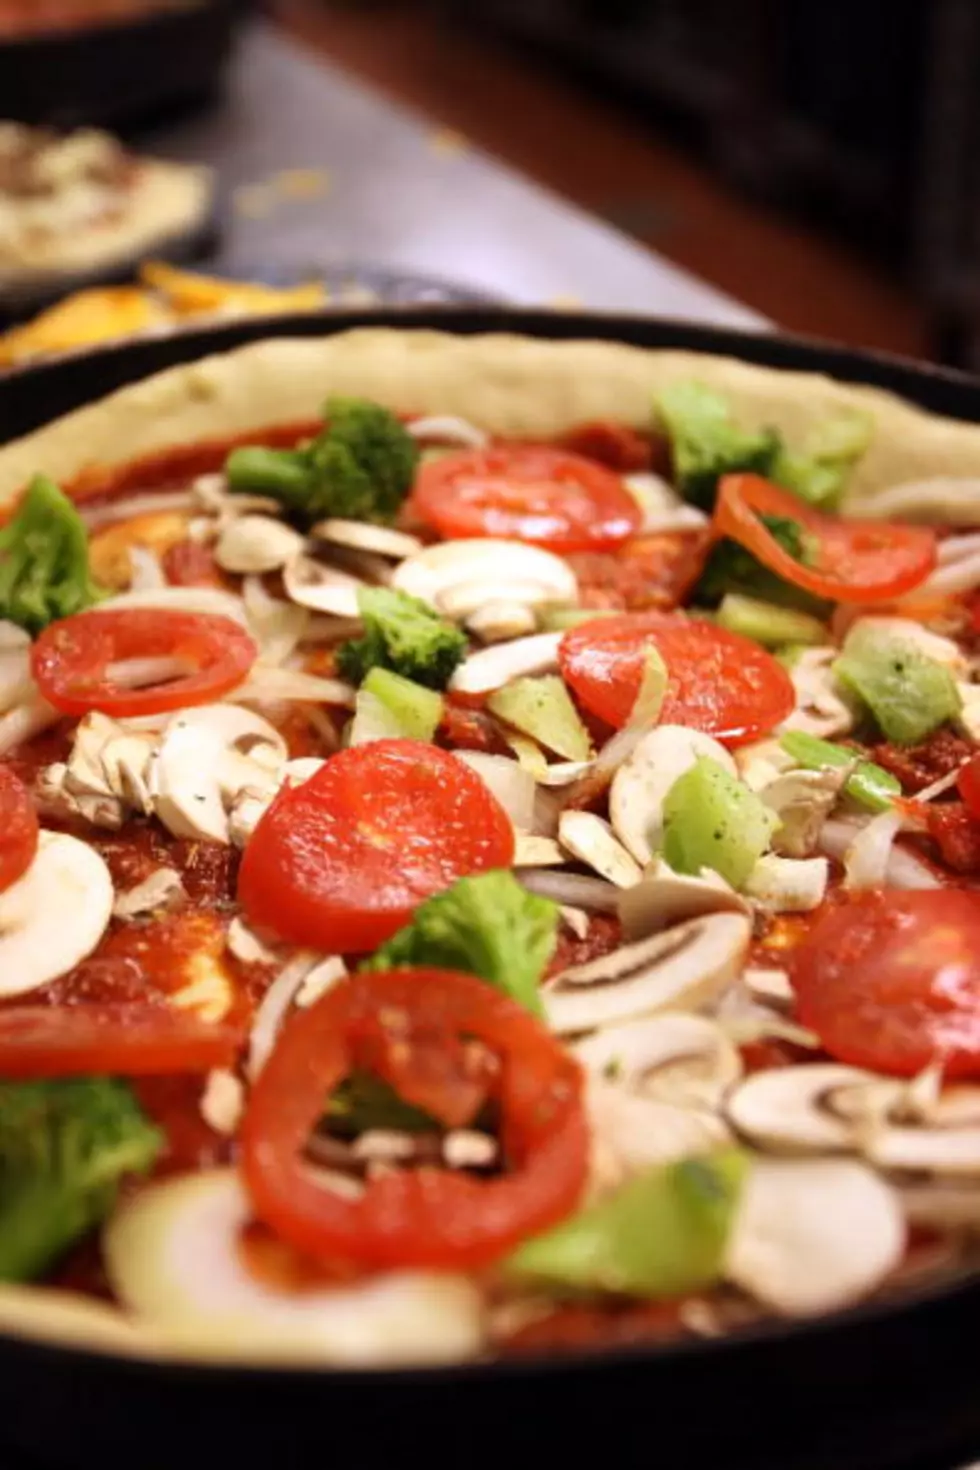 How To Make A Healthy Pizza